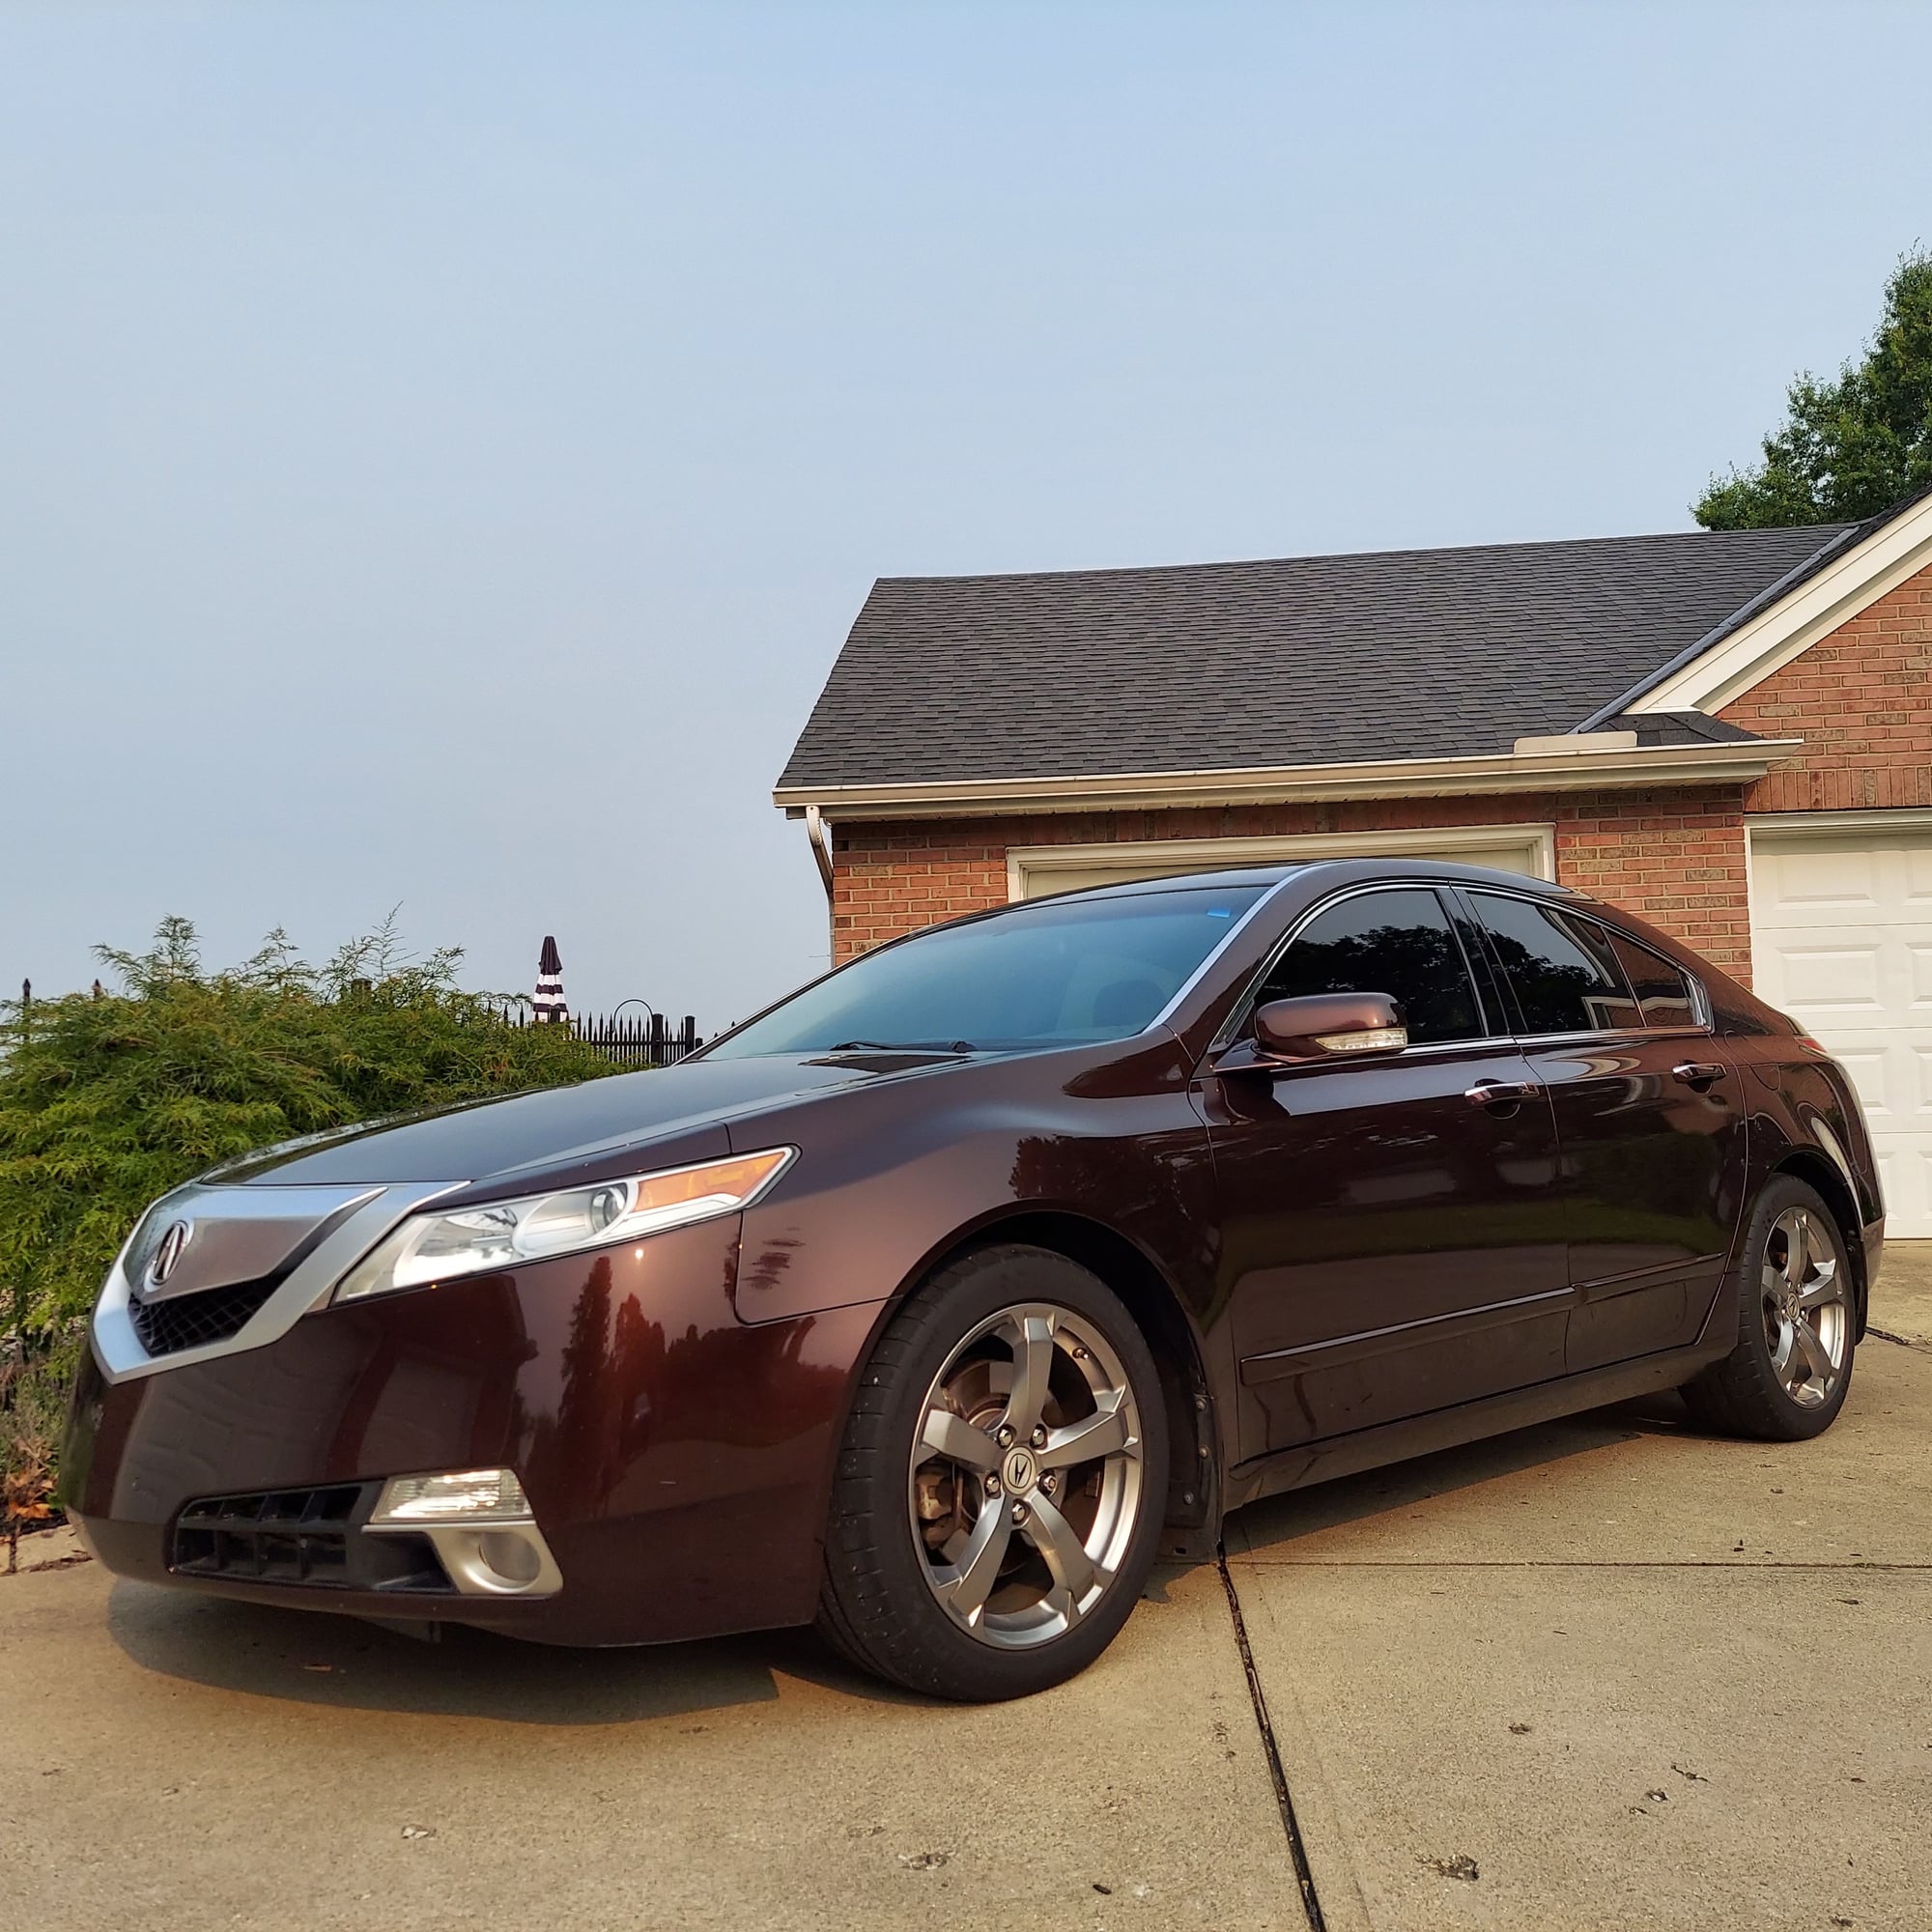 2010 Acura TL - FS: 2010 TL SH-AWD 6spd MT Mayan Bronze / Umber 2nd owner, no accidents - Used - VIN 19UUA9E57AA006138 - 6 cyl - AWD - Manual - Sedan - Brown - West Harrison, IN 47060, United States